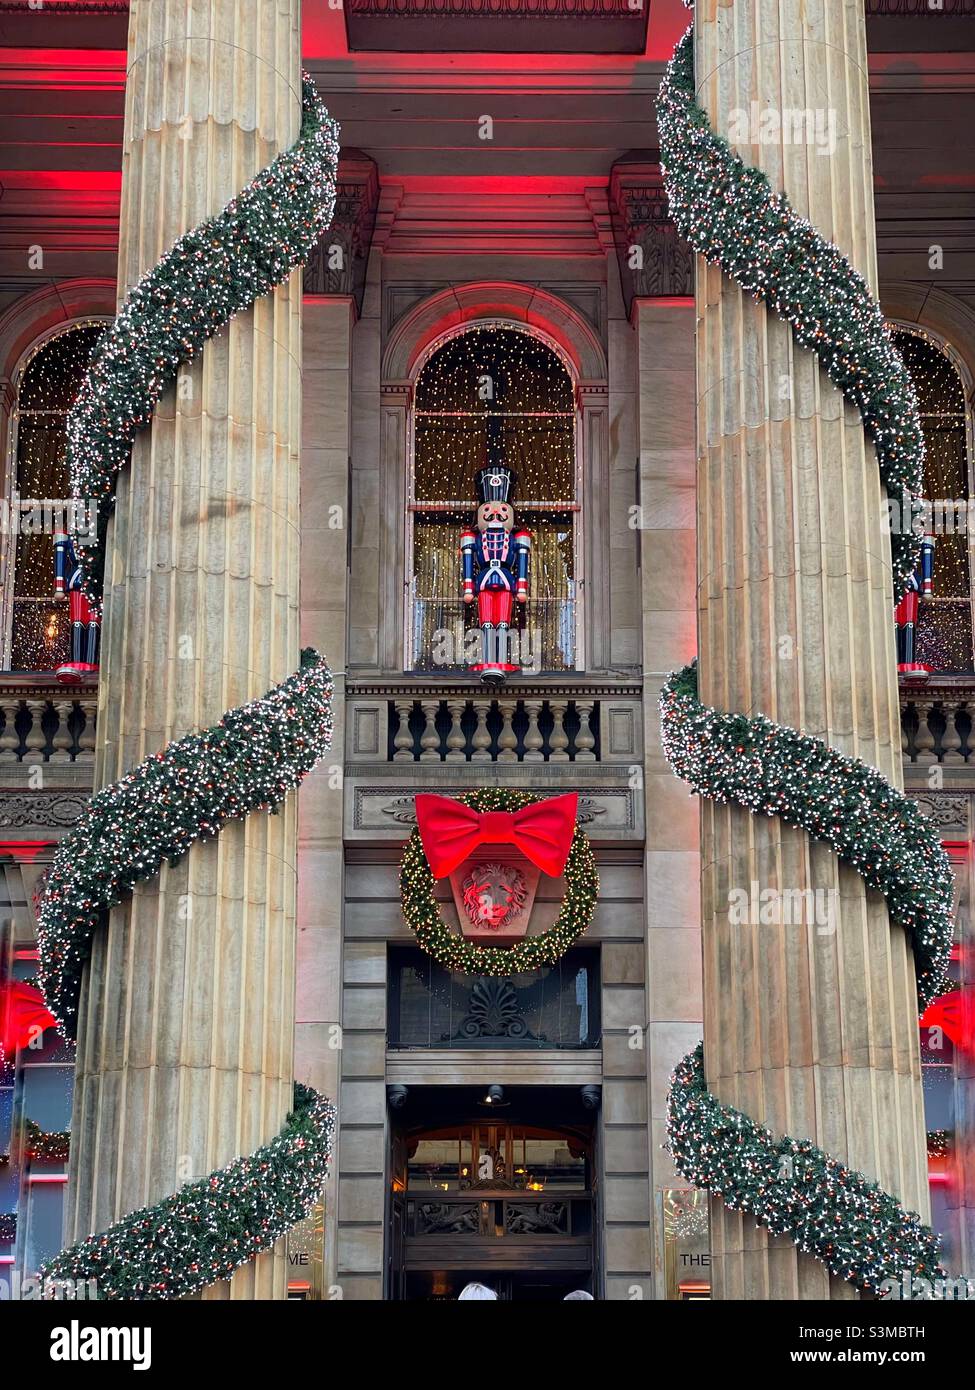 The Dome bar and restaurant, George Street, Edinburgh decorated for Christmas, 2021. Stock Photo